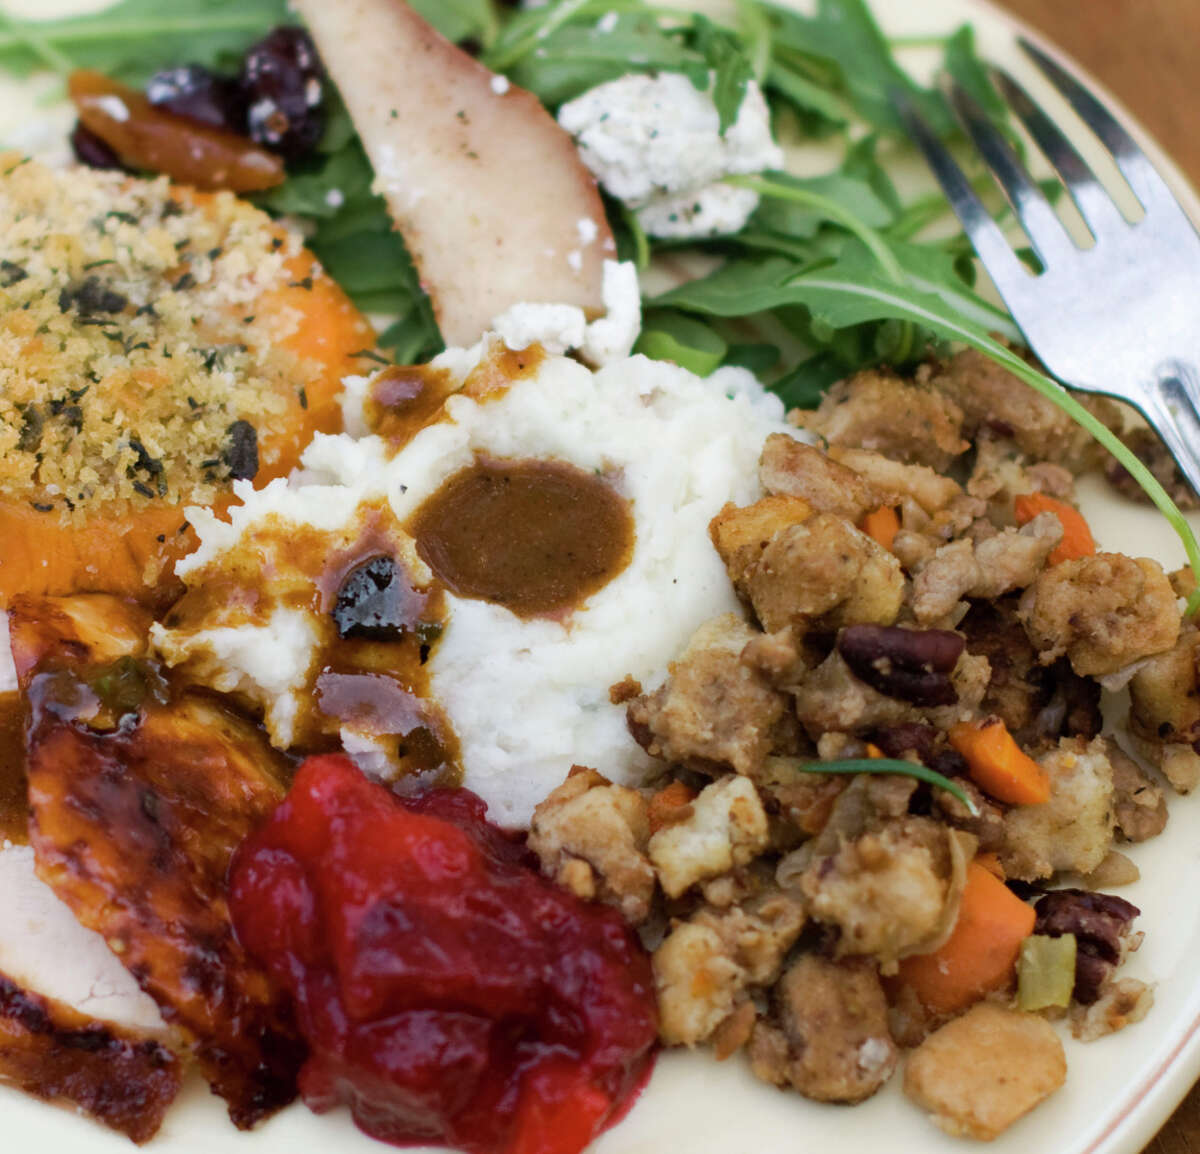 Eat hearty: cider-brined turkey with sage gravy, peach cranberry sauce, mashed potatoes, sausage pecan stuffing, arugula pear salad, sweet potatoes.